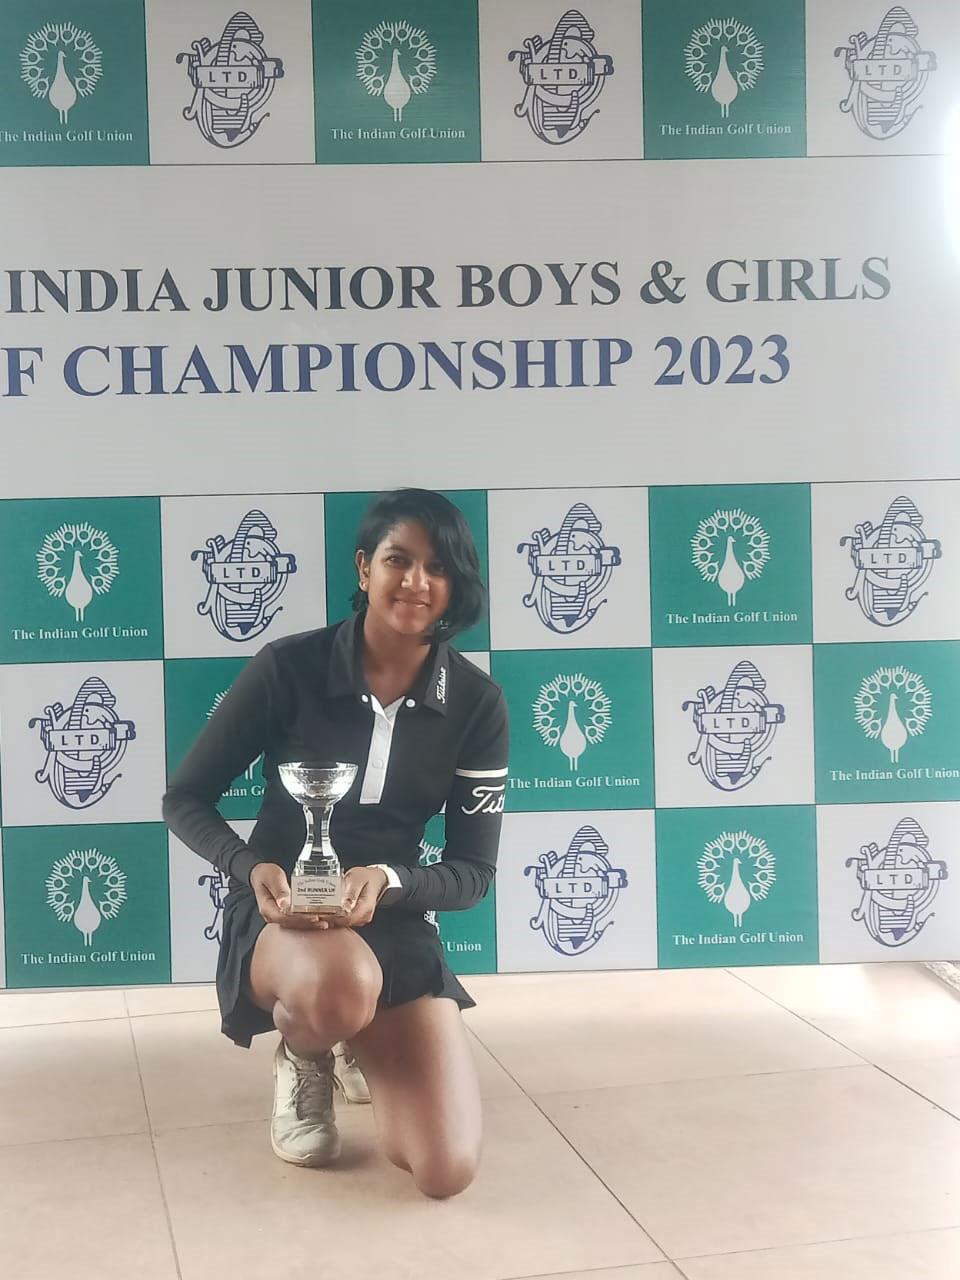 Dia Cris Kumar finished 3rd at the All India Junior Boys & Girls Golf Championship held at Poona Golf Club.